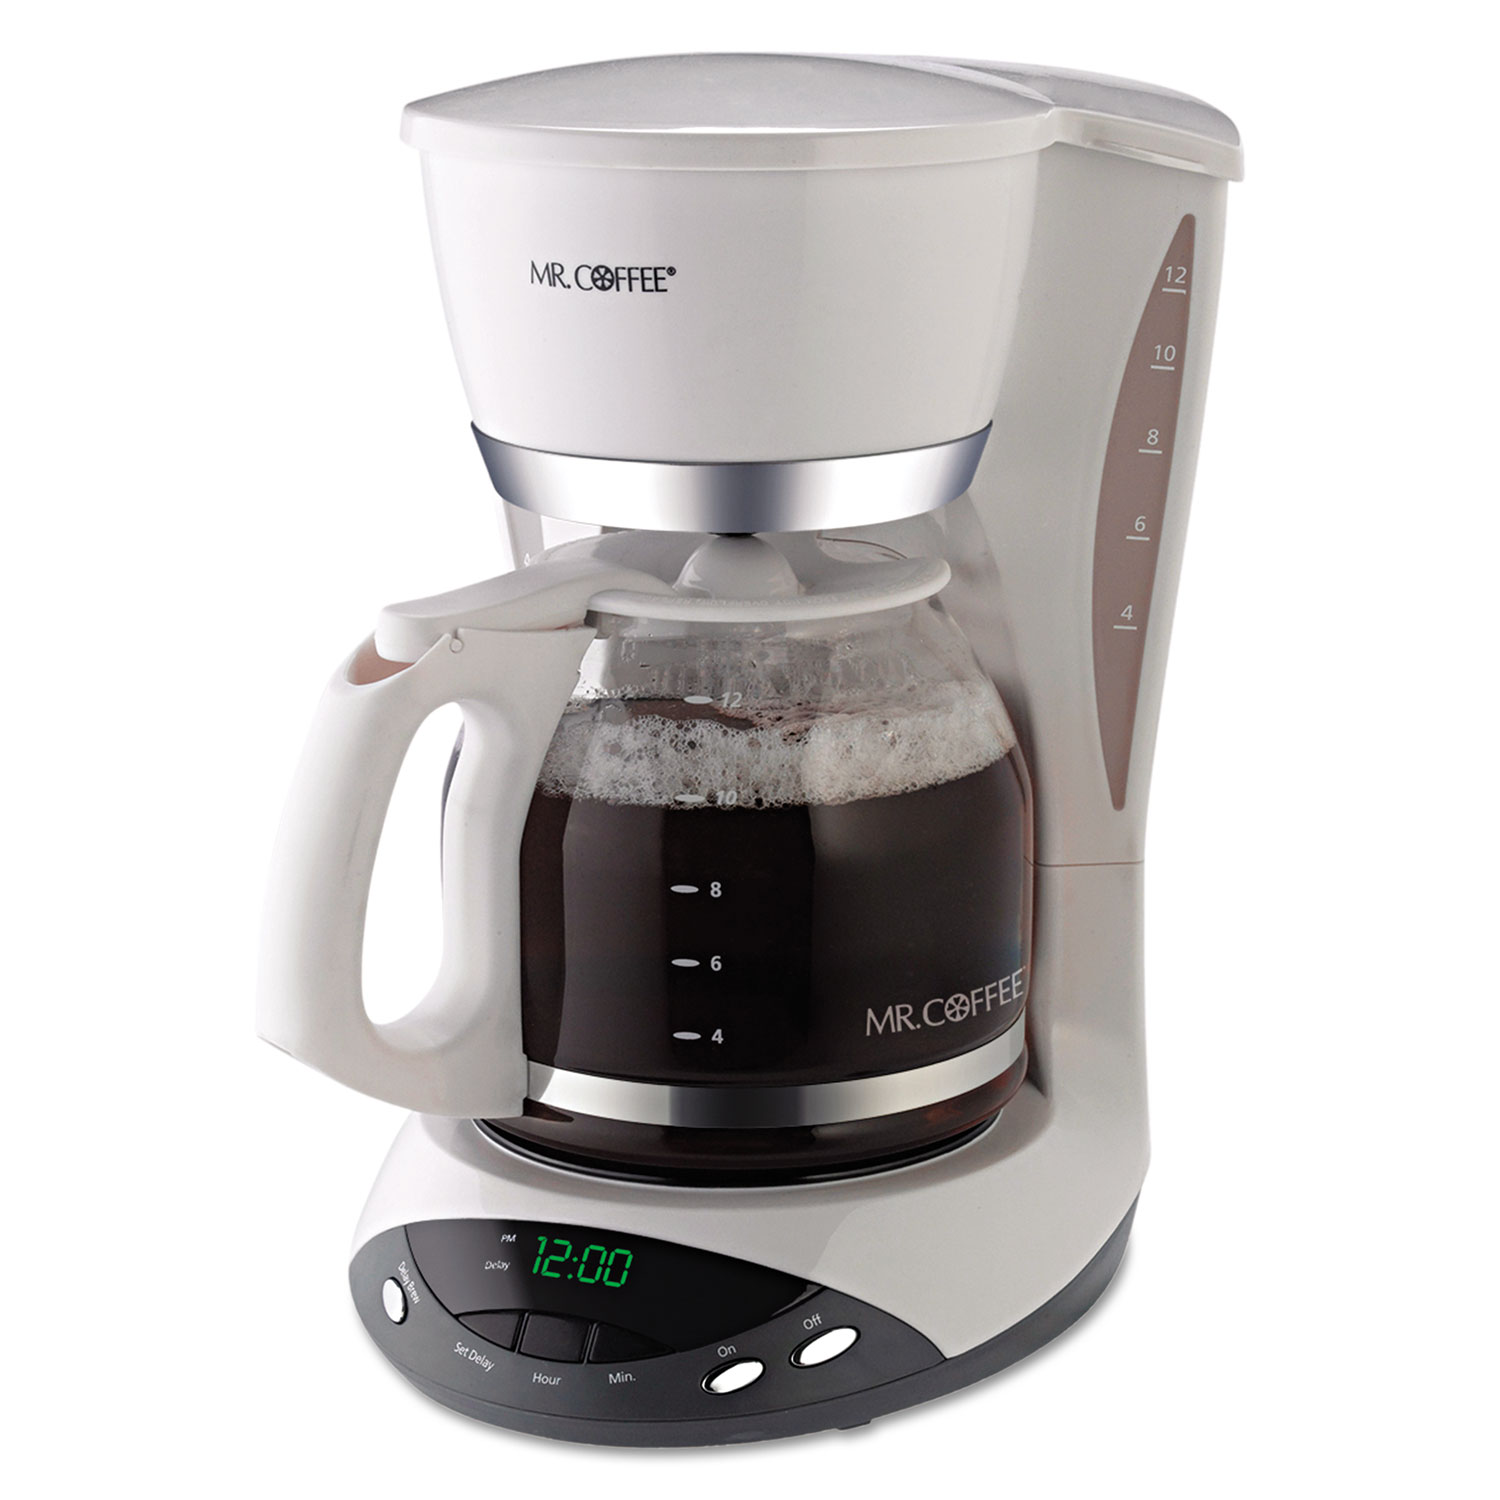  Mr. Coffee DWX20RB 12-Cup Programmable Coffeemaker, White (MFEDWX20RB) 